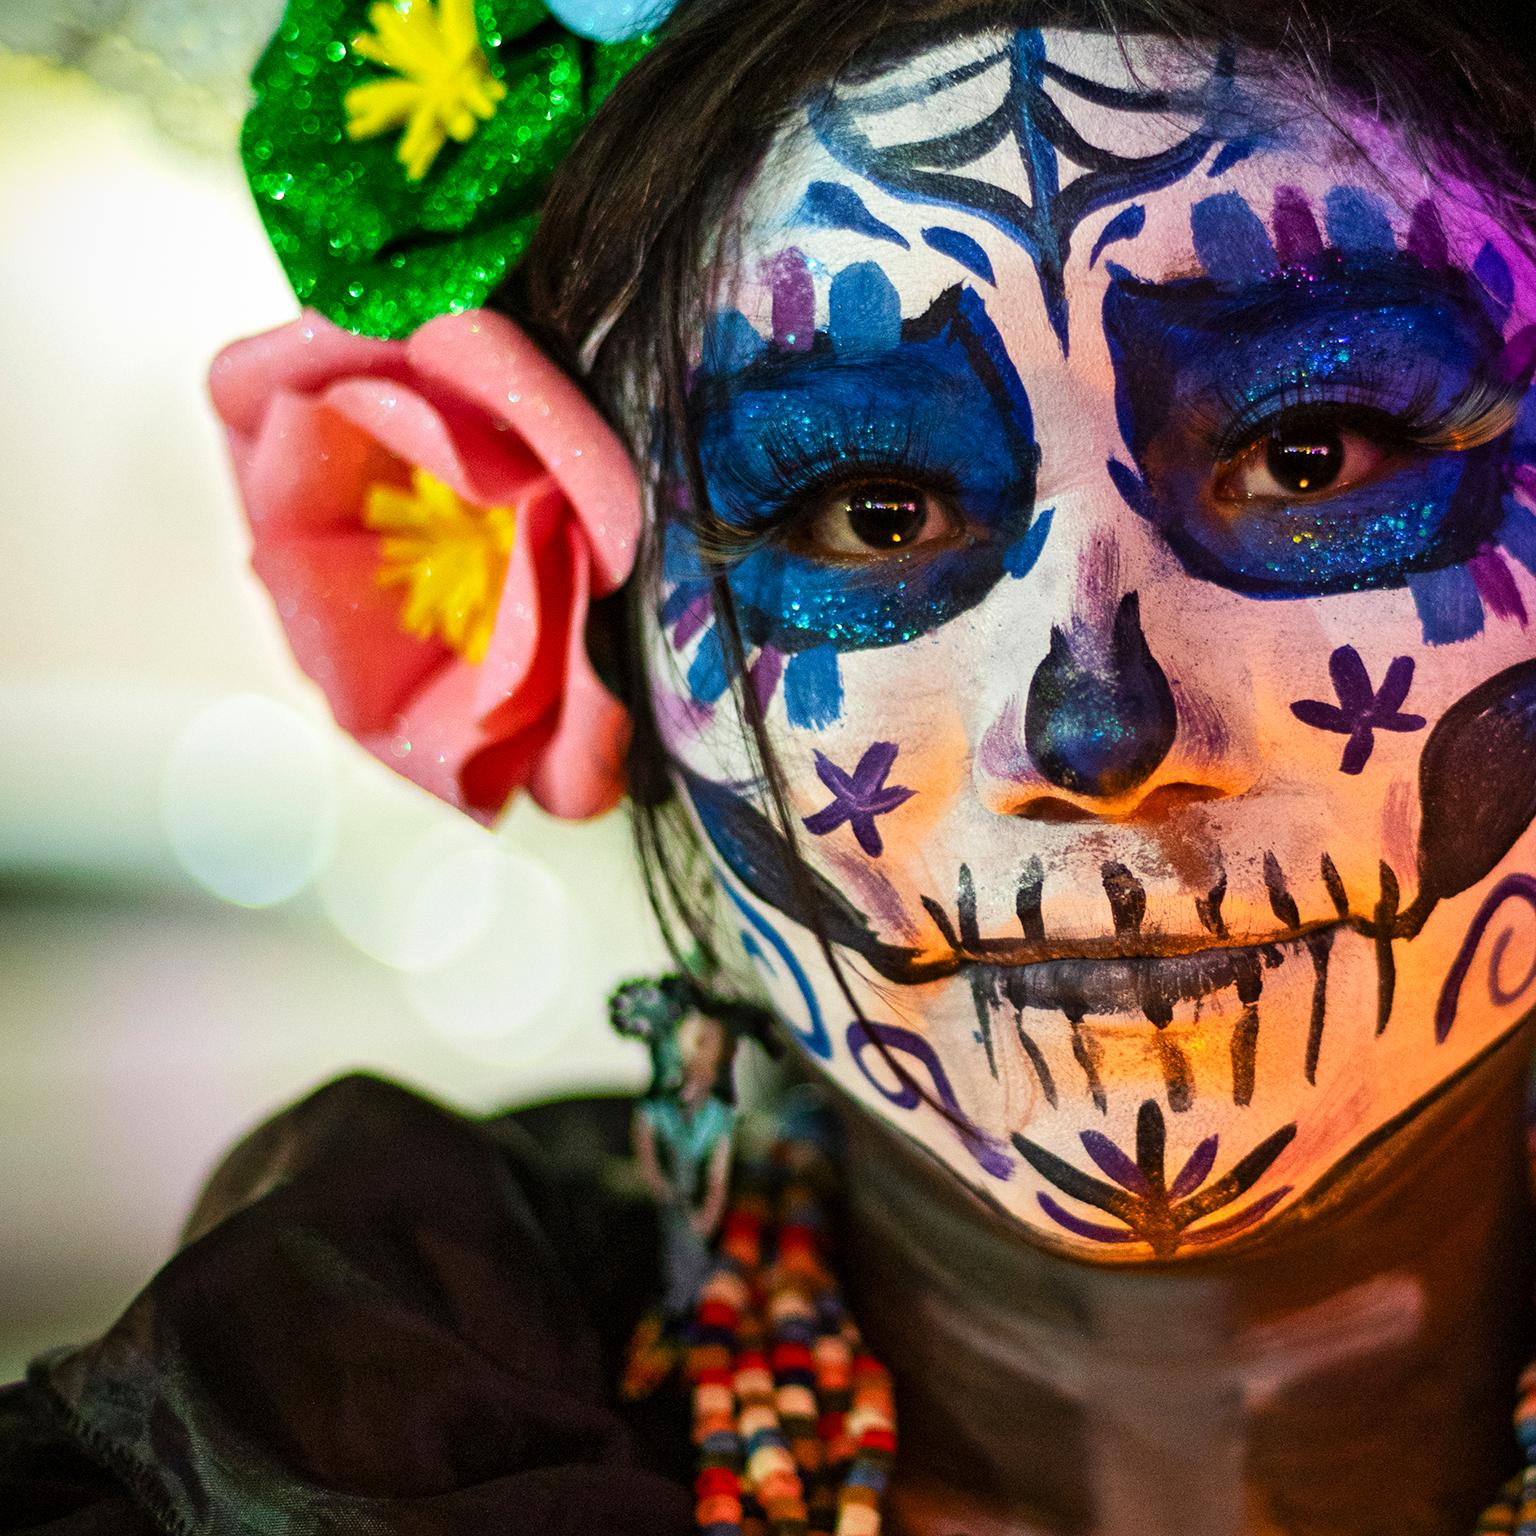 “ I wait for you evermore”, Day of the Dead, Dia de los Muertos, Isla Mujeres, Mexico, 2023

Photograph by Cosmo Condina in colour of a woman in skeleton mask dressed for the celebration of the Day of the Dead. Isla Mujeres, Mexico, 2023 

Archival